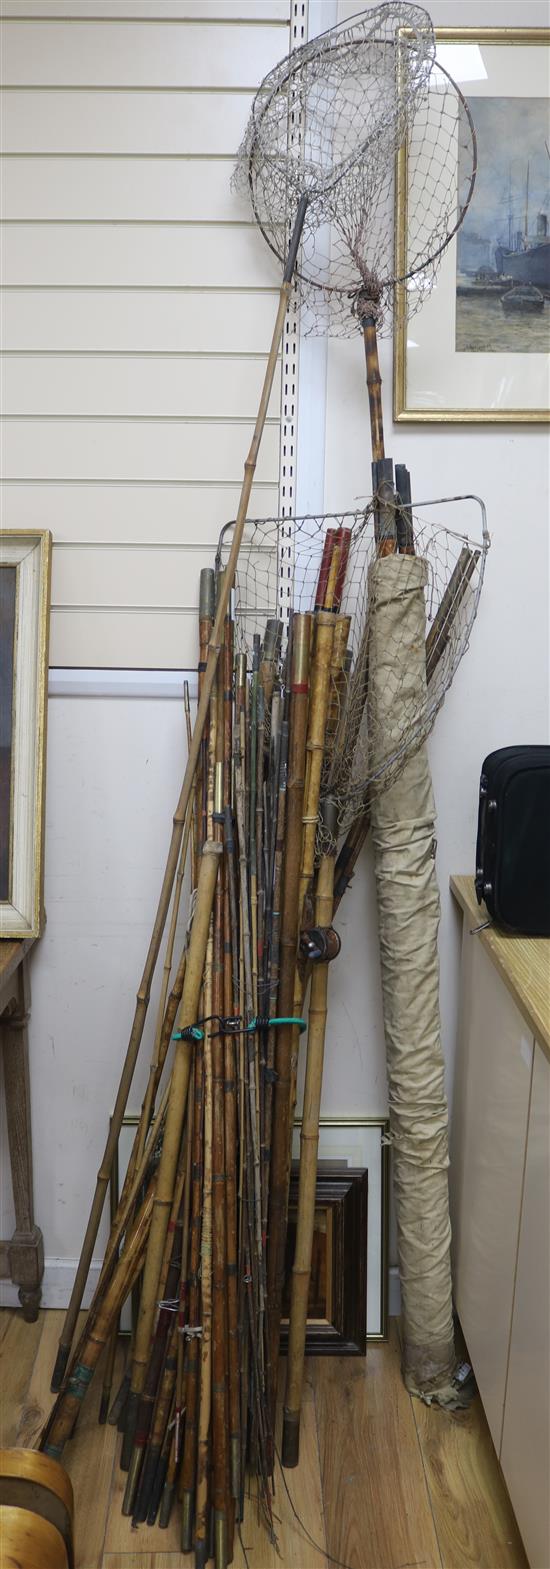 A quantity of fishing rods and nets